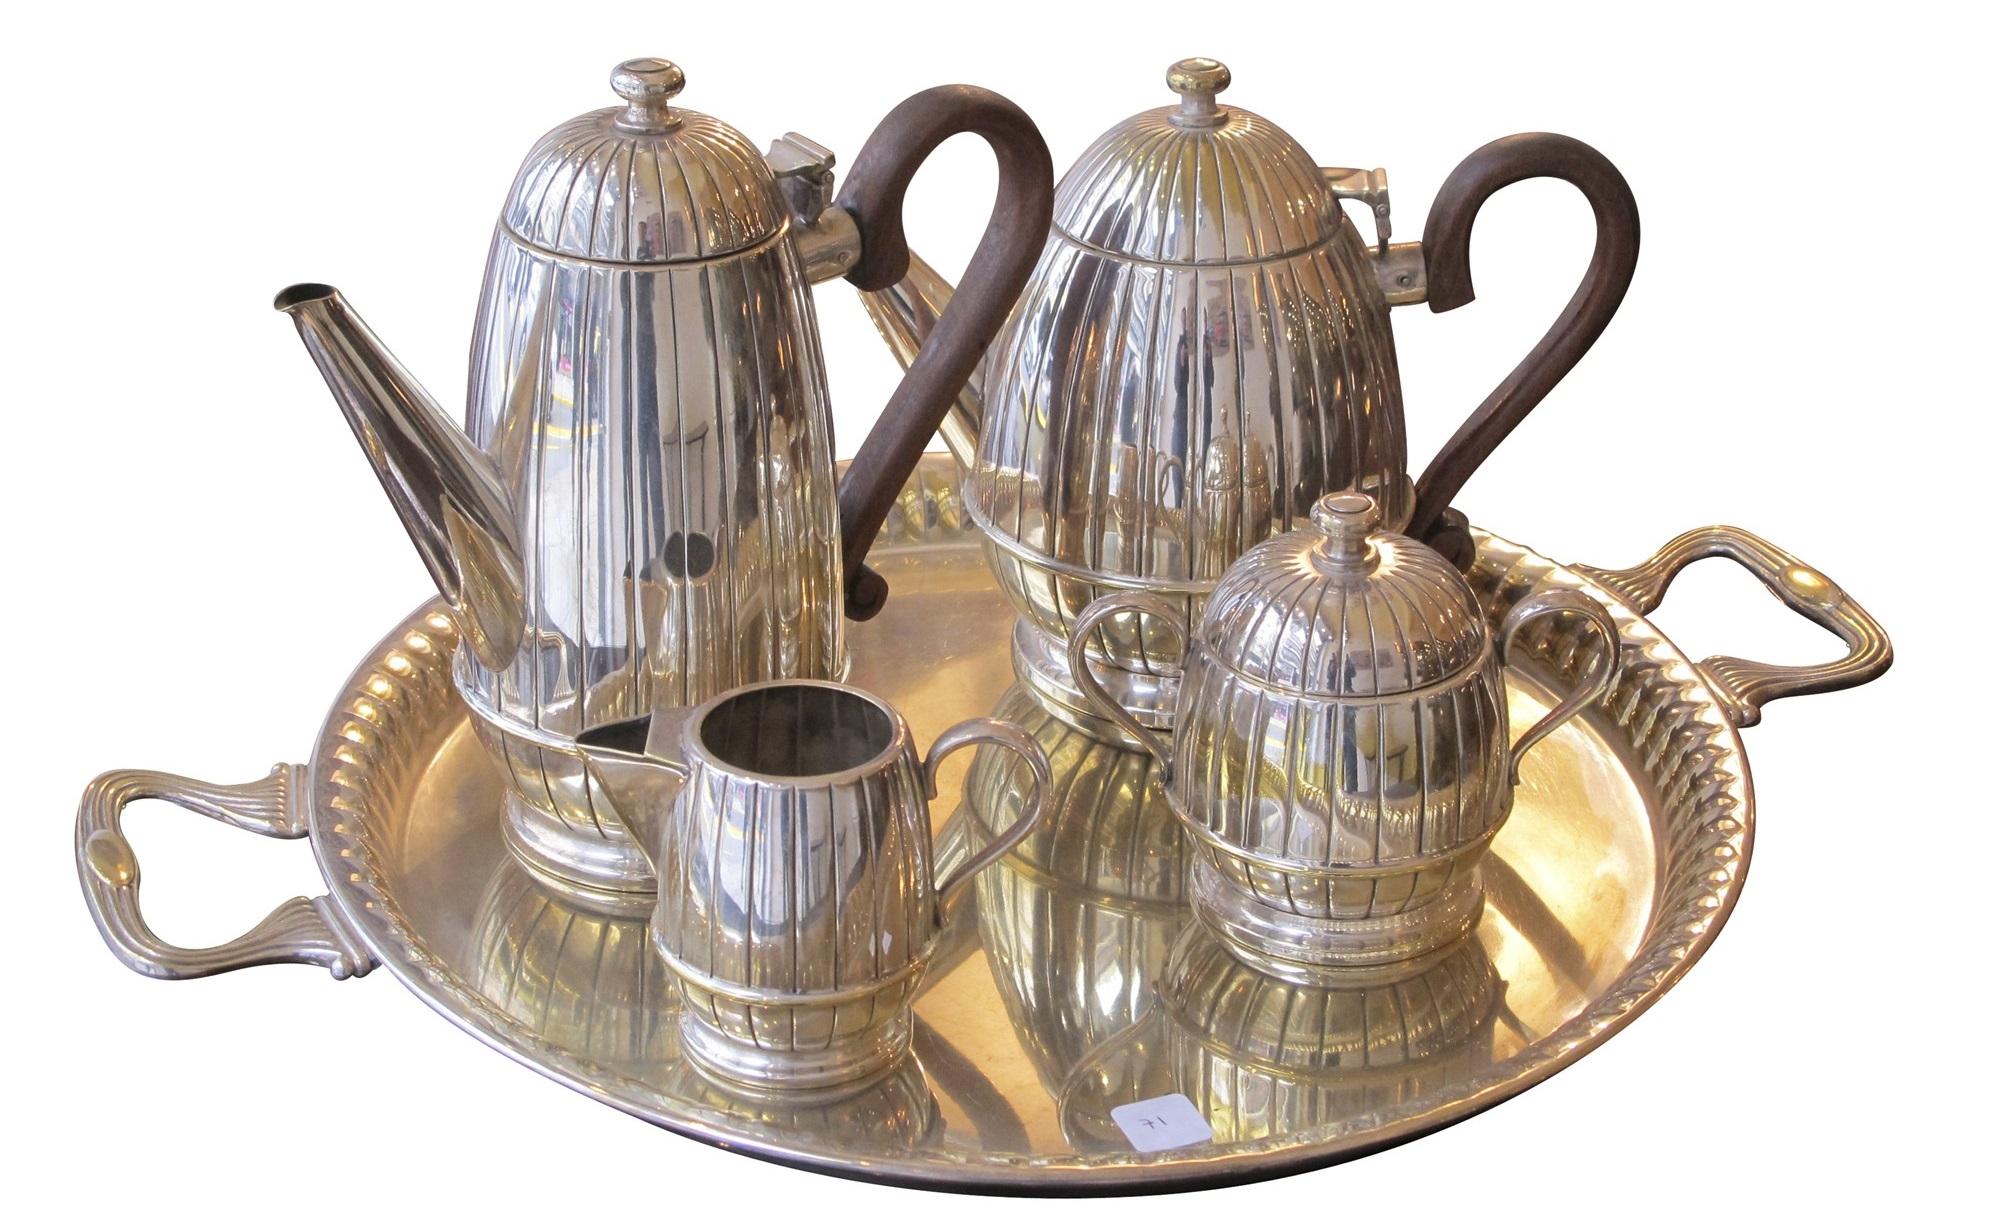 Full side tea and coffe service
Sign: Atenea
materials: silver plated and wood
We have specialized in the sale of Art Deco and Art Nouveau and Vintage styles since 1982. If you have any questions we are at your disposal.
Pushing the button that